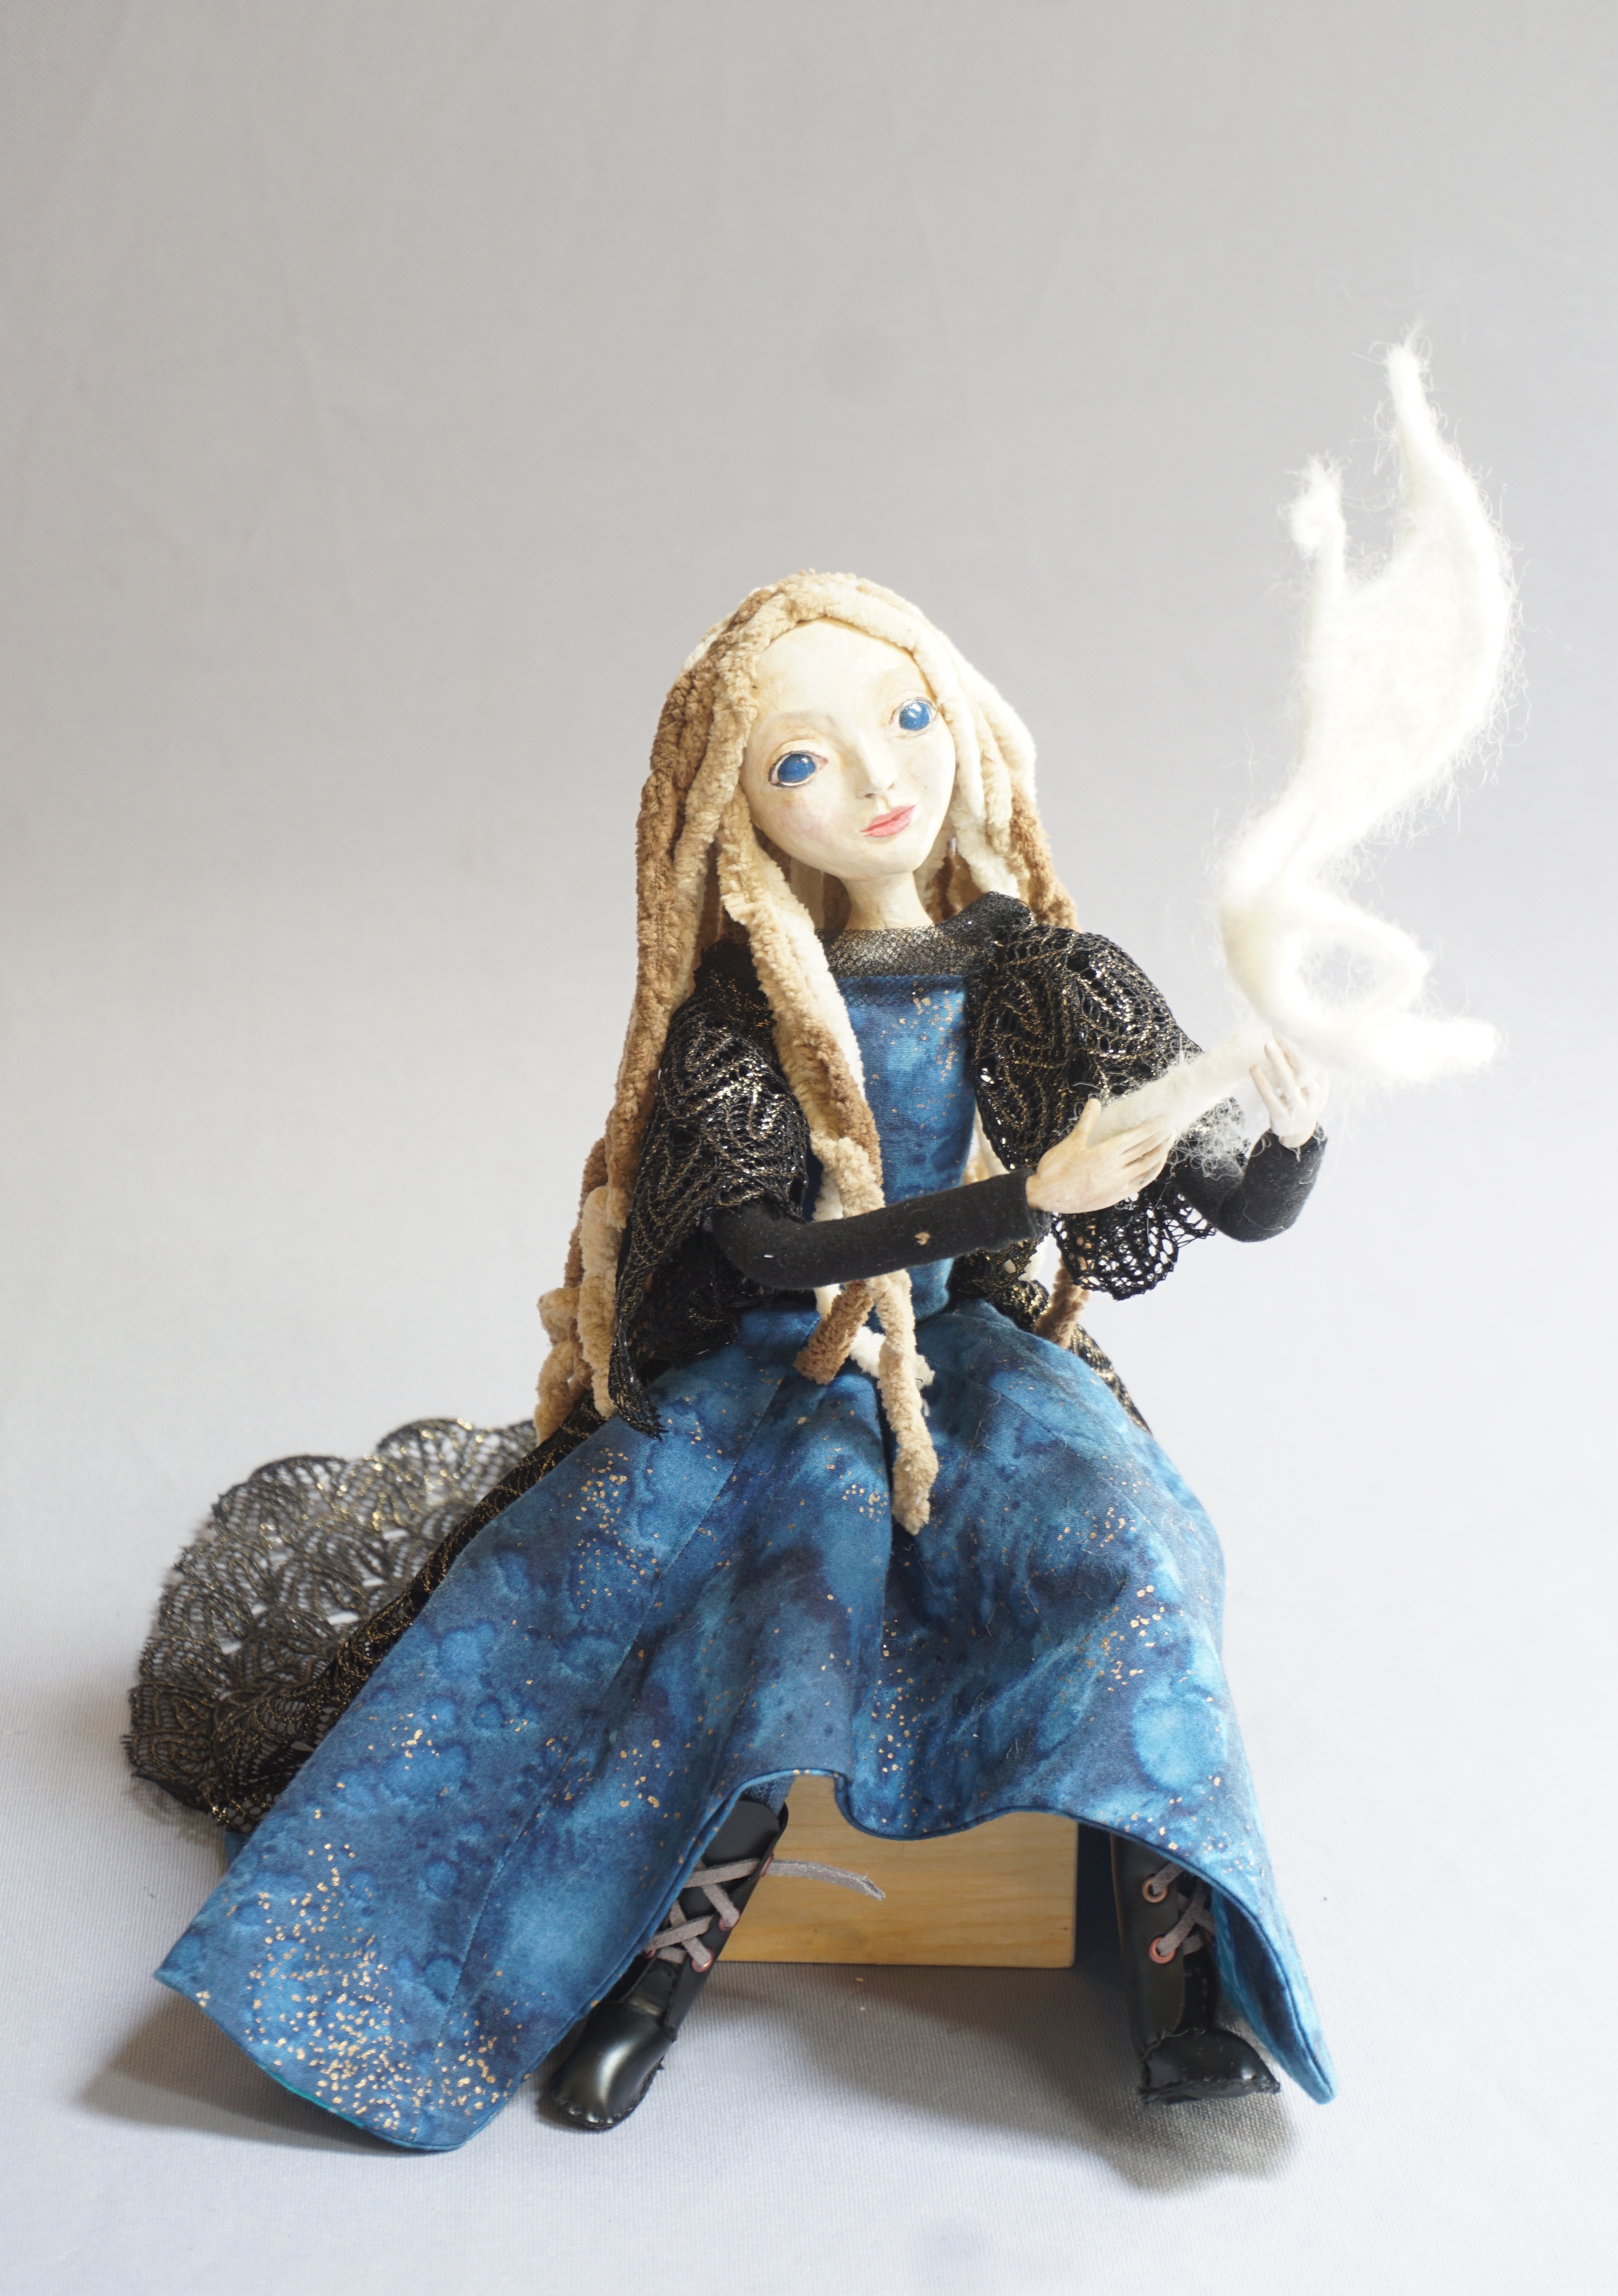 Spinning Dreams - seated magical art doll figure sculpture